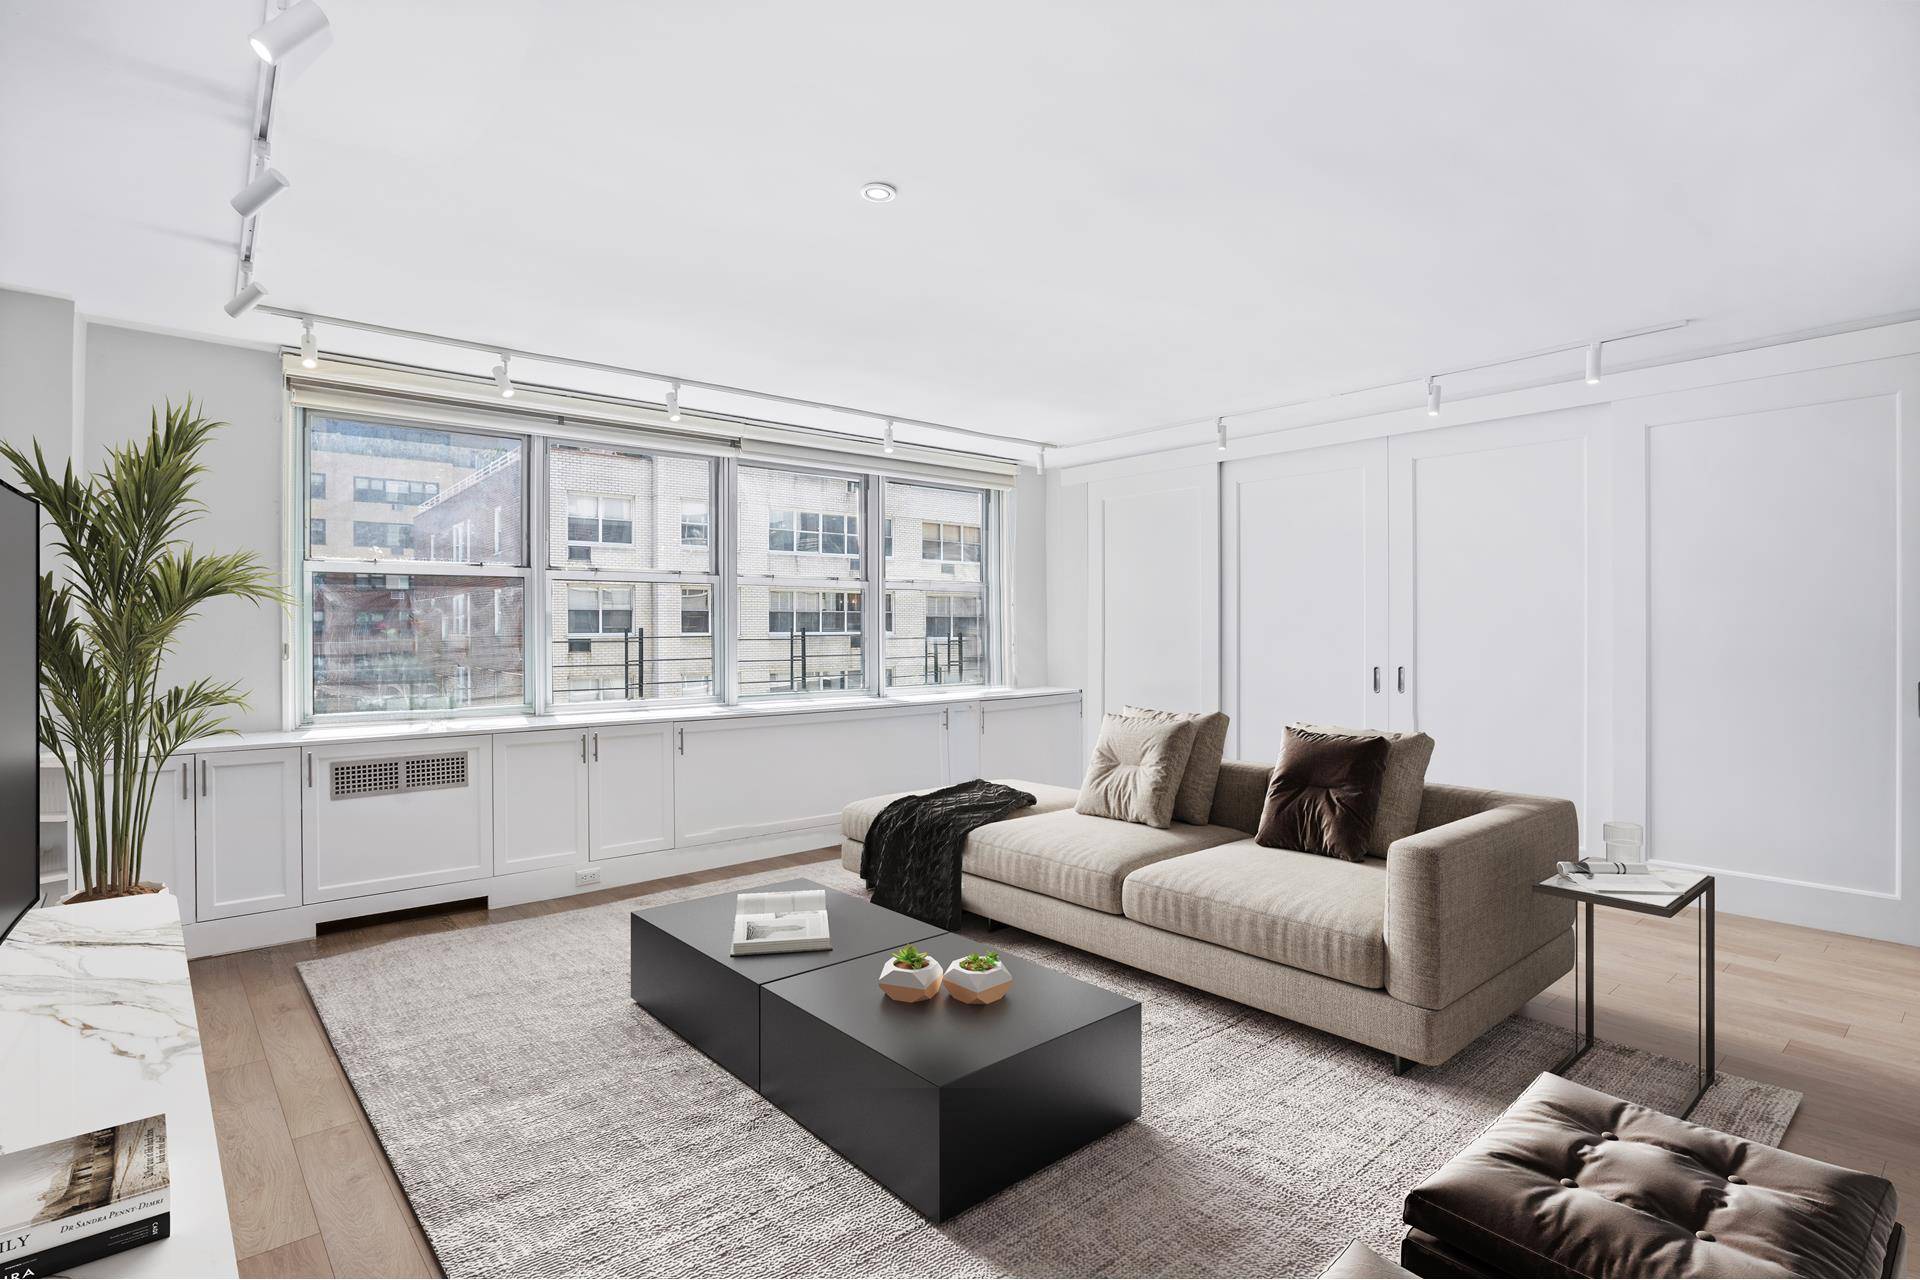 Upper East Side, 2 Bedroom, Custom Kitchen, Top of the line Appliance Package, Prime LocationWelcome to Residence 9F, a spacious 2BR 2BA apartment with wide plank hardwood floors and high ...